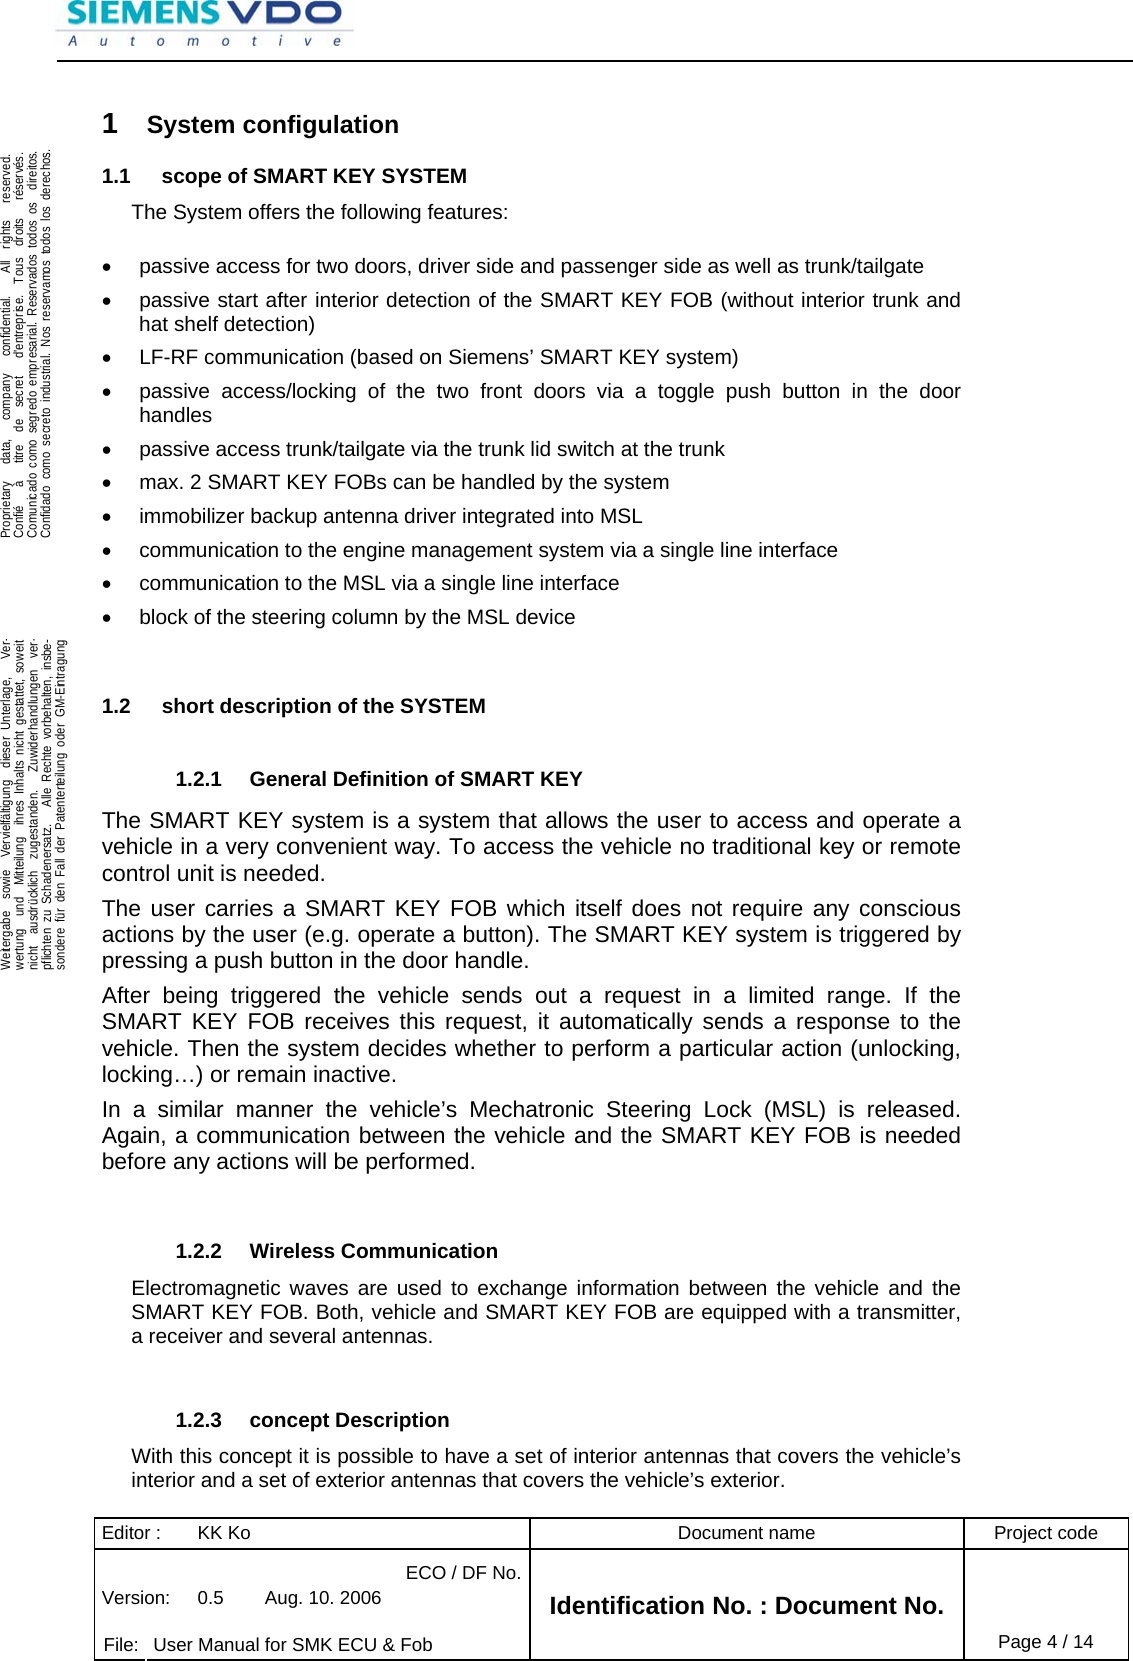 Editor :  KK Ko  Document name  Project code ECO / DF No.Version:  0.5  Aug. 10. 2006    File:  User Manual for SMK ECU &amp; Fob Identification No. : Document No. Page 4 / 14    .Proprietary   data,   company   confidential.    All  rights   reserved.Confié   à   titre  de  secret   d&apos;entreprise.  Tous  droits   réservés.Comunicado como segredo empresarial. Reservados todos os  direitos.Confidado como secreto industrial. Nos reservamos todos los derechos.  .Weitergabe  sowie  Vervielfältigung  dieser Unterlage,   Ver-wertung  und  Mitteilung  ihres Inhalts nicht gestattet, soweitnicht  ausdrücklich  zugestanden.   Zuwiderhandlungen  ver-pflichten zu Schadenersatz.   Alle Rechte vorbehalten, insbe-sondere für den Fall der Patenterteilung oder GM-Eintragung  1  System configulation 1.1  scope of SMART KEY SYSTEM The System offers the following features:  •  passive access for two doors, driver side and passenger side as well as trunk/tailgate •  passive start after interior detection of the SMART KEY FOB (without interior trunk and hat shelf detection) •  LF-RF communication (based on Siemens’ SMART KEY system) •  passive access/locking of the two front doors via a toggle push button in the door handles •  passive access trunk/tailgate via the trunk lid switch at the trunk •  max. 2 SMART KEY FOBs can be handled by the system •  immobilizer backup antenna driver integrated into MSL •  communication to the engine management system via a single line interface •  communication to the MSL via a single line interface •  block of the steering column by the MSL device   1.2  short description of the SYSTEM  1.2.1  General Definition of SMART KEY The SMART KEY system is a system that allows the user to access and operate a vehicle in a very convenient way. To access the vehicle no traditional key or remote control unit is needed.  The user carries a SMART KEY FOB which itself does not require any conscious actions by the user (e.g. operate a button). The SMART KEY system is triggered by pressing a push button in the door handle.  After being triggered the vehicle sends out a request in a limited range. If the SMART KEY FOB receives this request, it automatically sends a response to the vehicle. Then the system decides whether to perform a particular action (unlocking, locking…) or remain inactive. In a similar manner the vehicle’s Mechatronic Steering Lock (MSL) is released. Again, a communication between the vehicle and the SMART KEY FOB is needed before any actions will be performed.   1.2.2 Wireless Communication Electromagnetic waves are used to exchange information between the vehicle and the SMART KEY FOB. Both, vehicle and SMART KEY FOB are equipped with a transmitter, a receiver and several antennas.    1.2.3 concept Description With this concept it is possible to have a set of interior antennas that covers the vehicle’s interior and a set of exterior antennas that covers the vehicle’s exterior. 